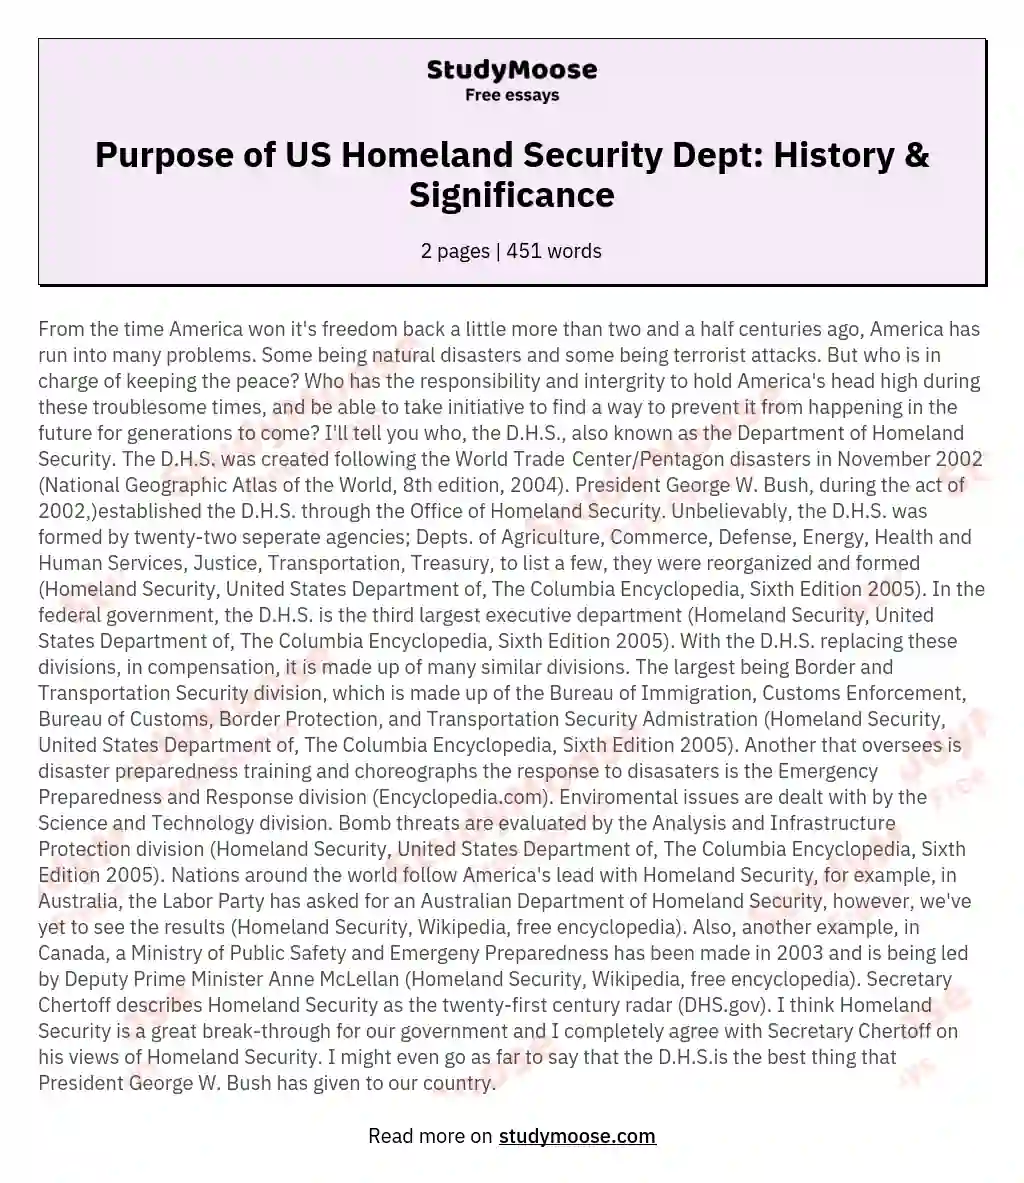 Purpose of US Homeland Security Dept: History & Significance essay